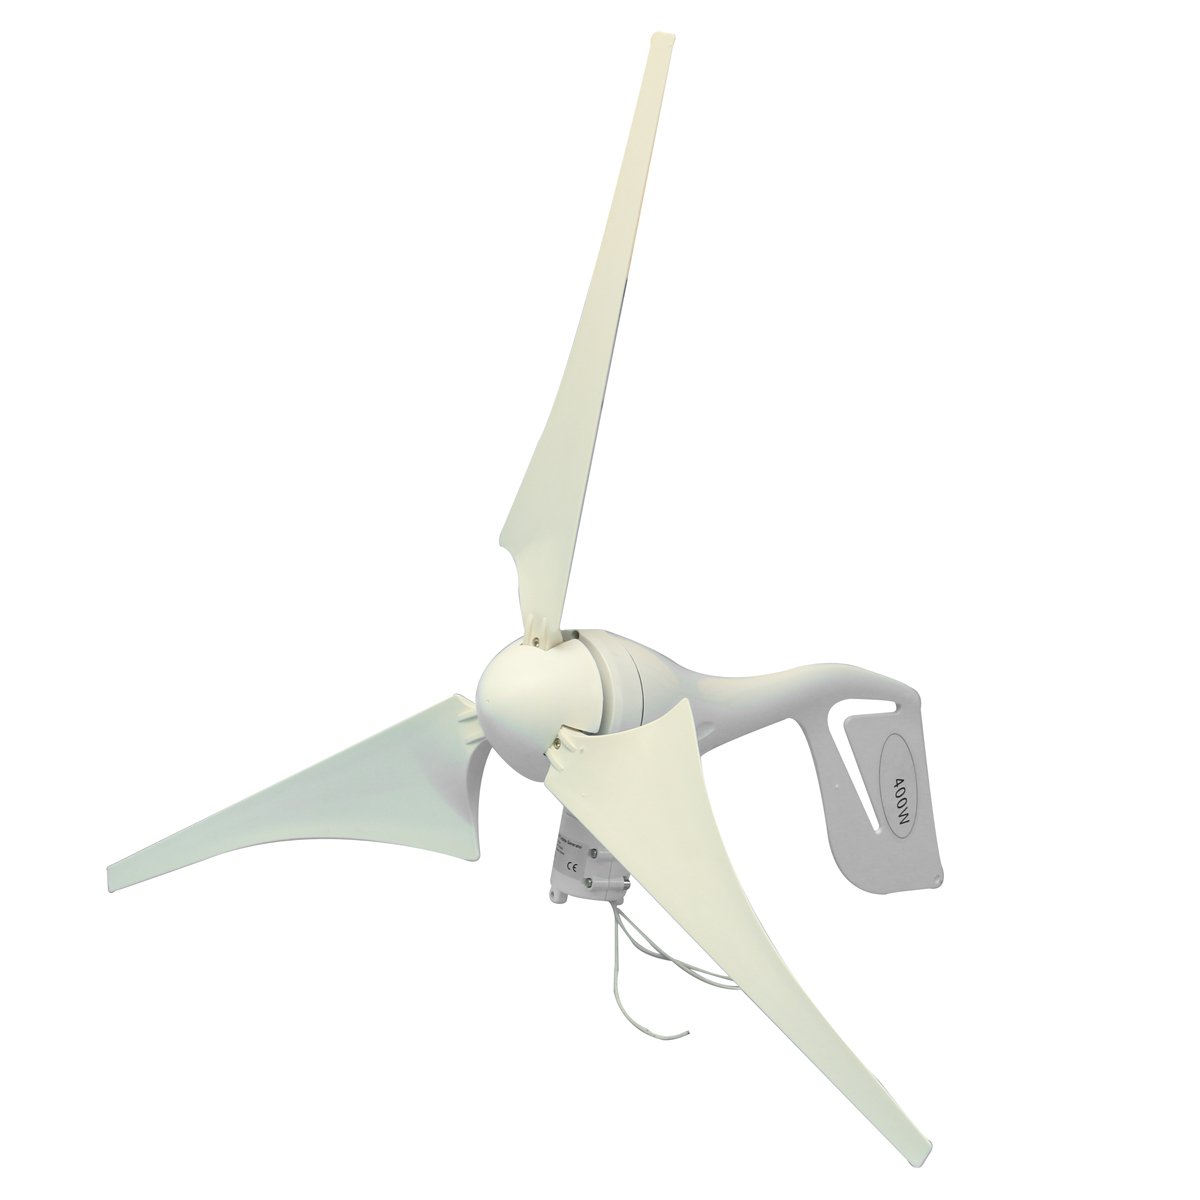 

400W Wind Turbine Generator DC 12V 24V 3 Blades with Waterproof Charge Controller